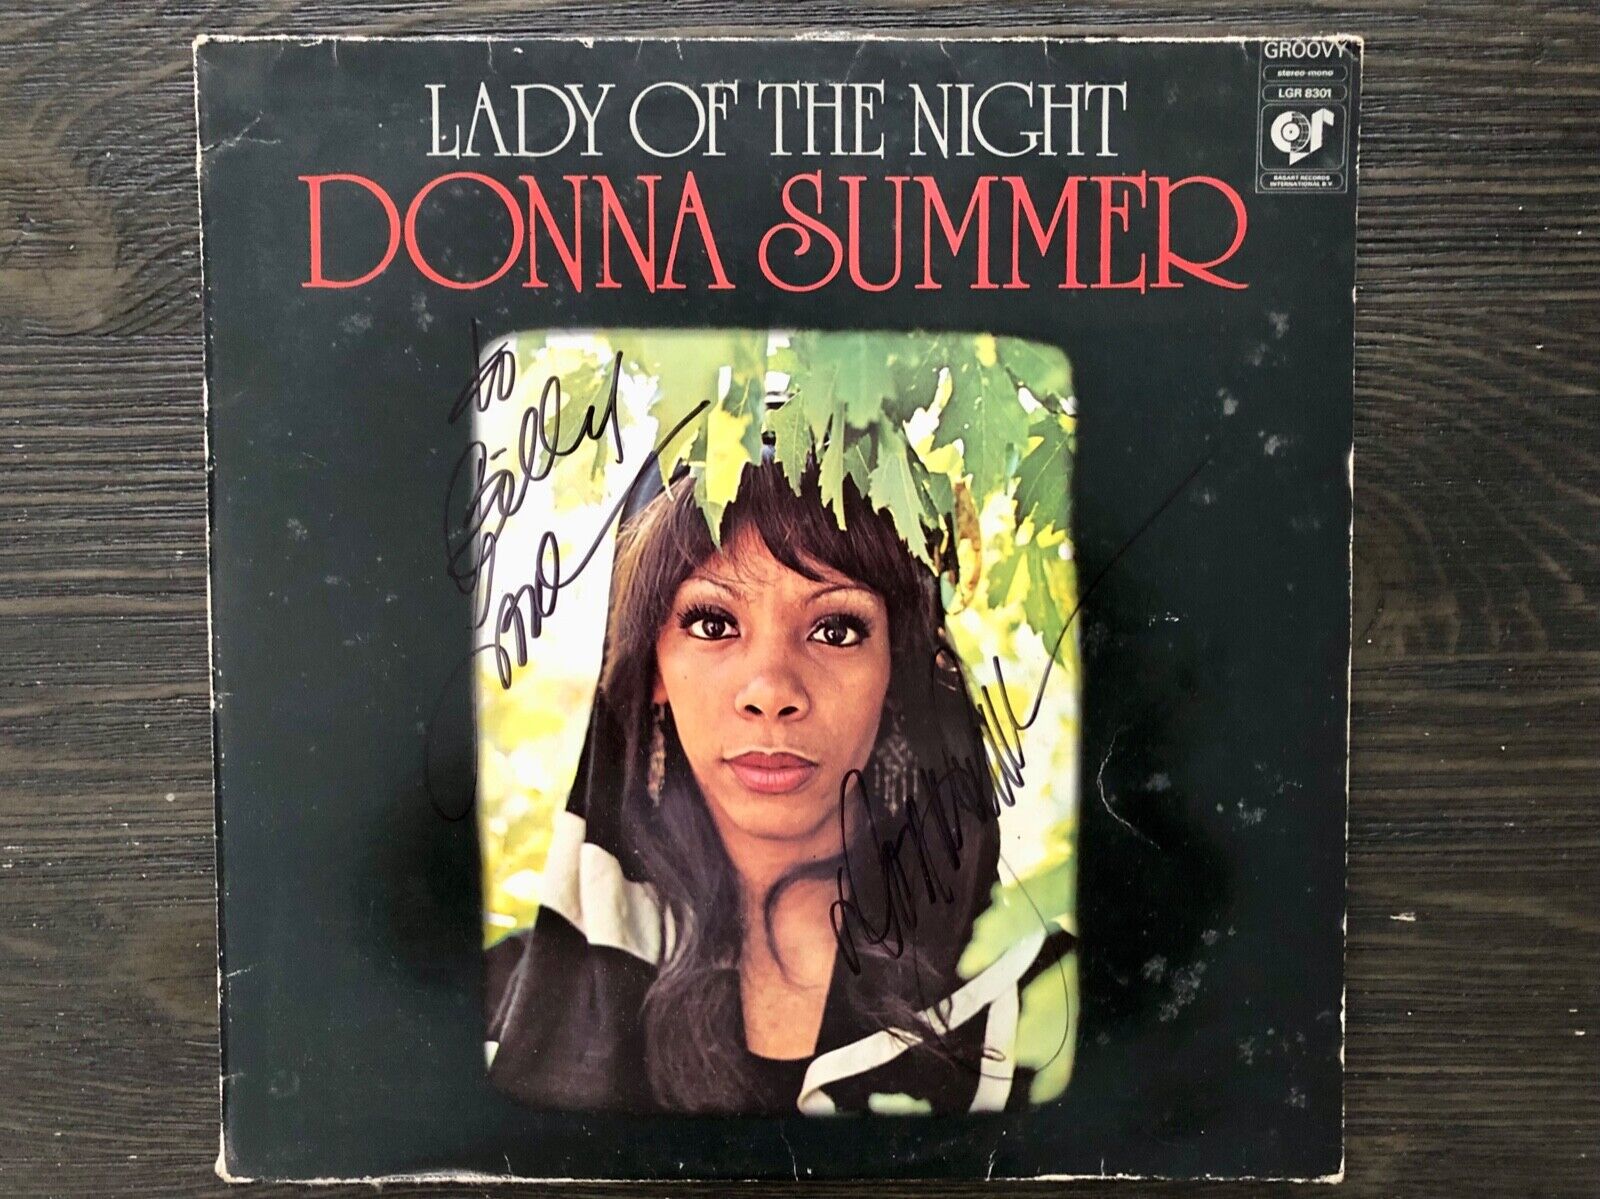 DONNA SUMMER Authenticated, Hand Lady of the Night LP in Person / Proof